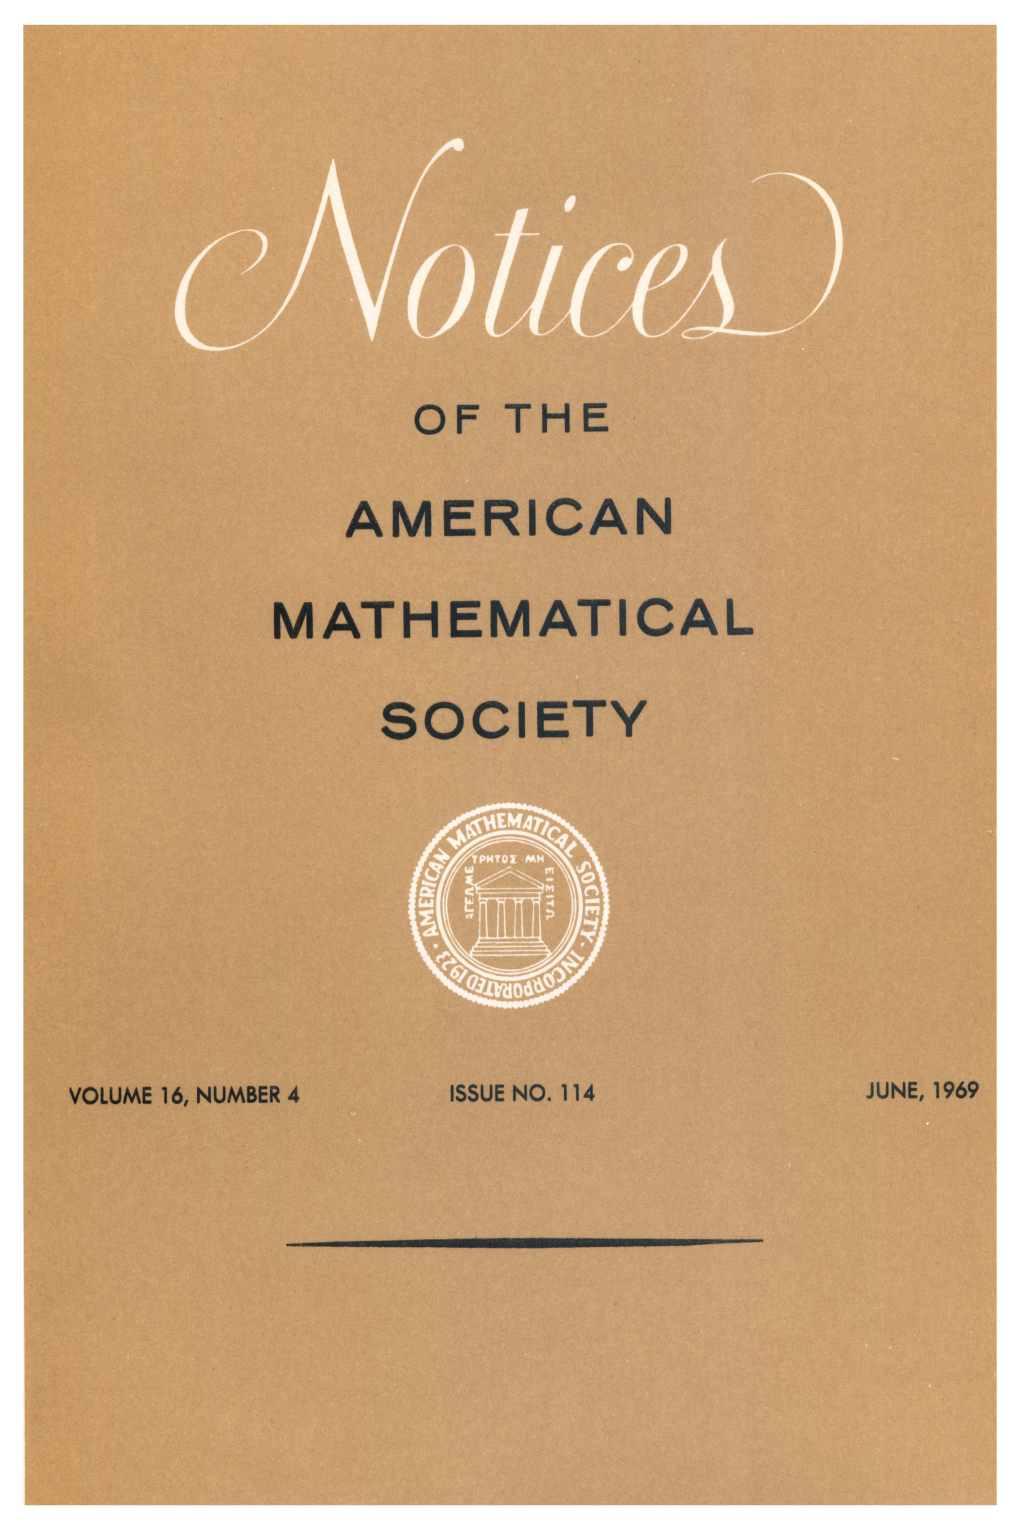 Notices of the American Mathematical Society